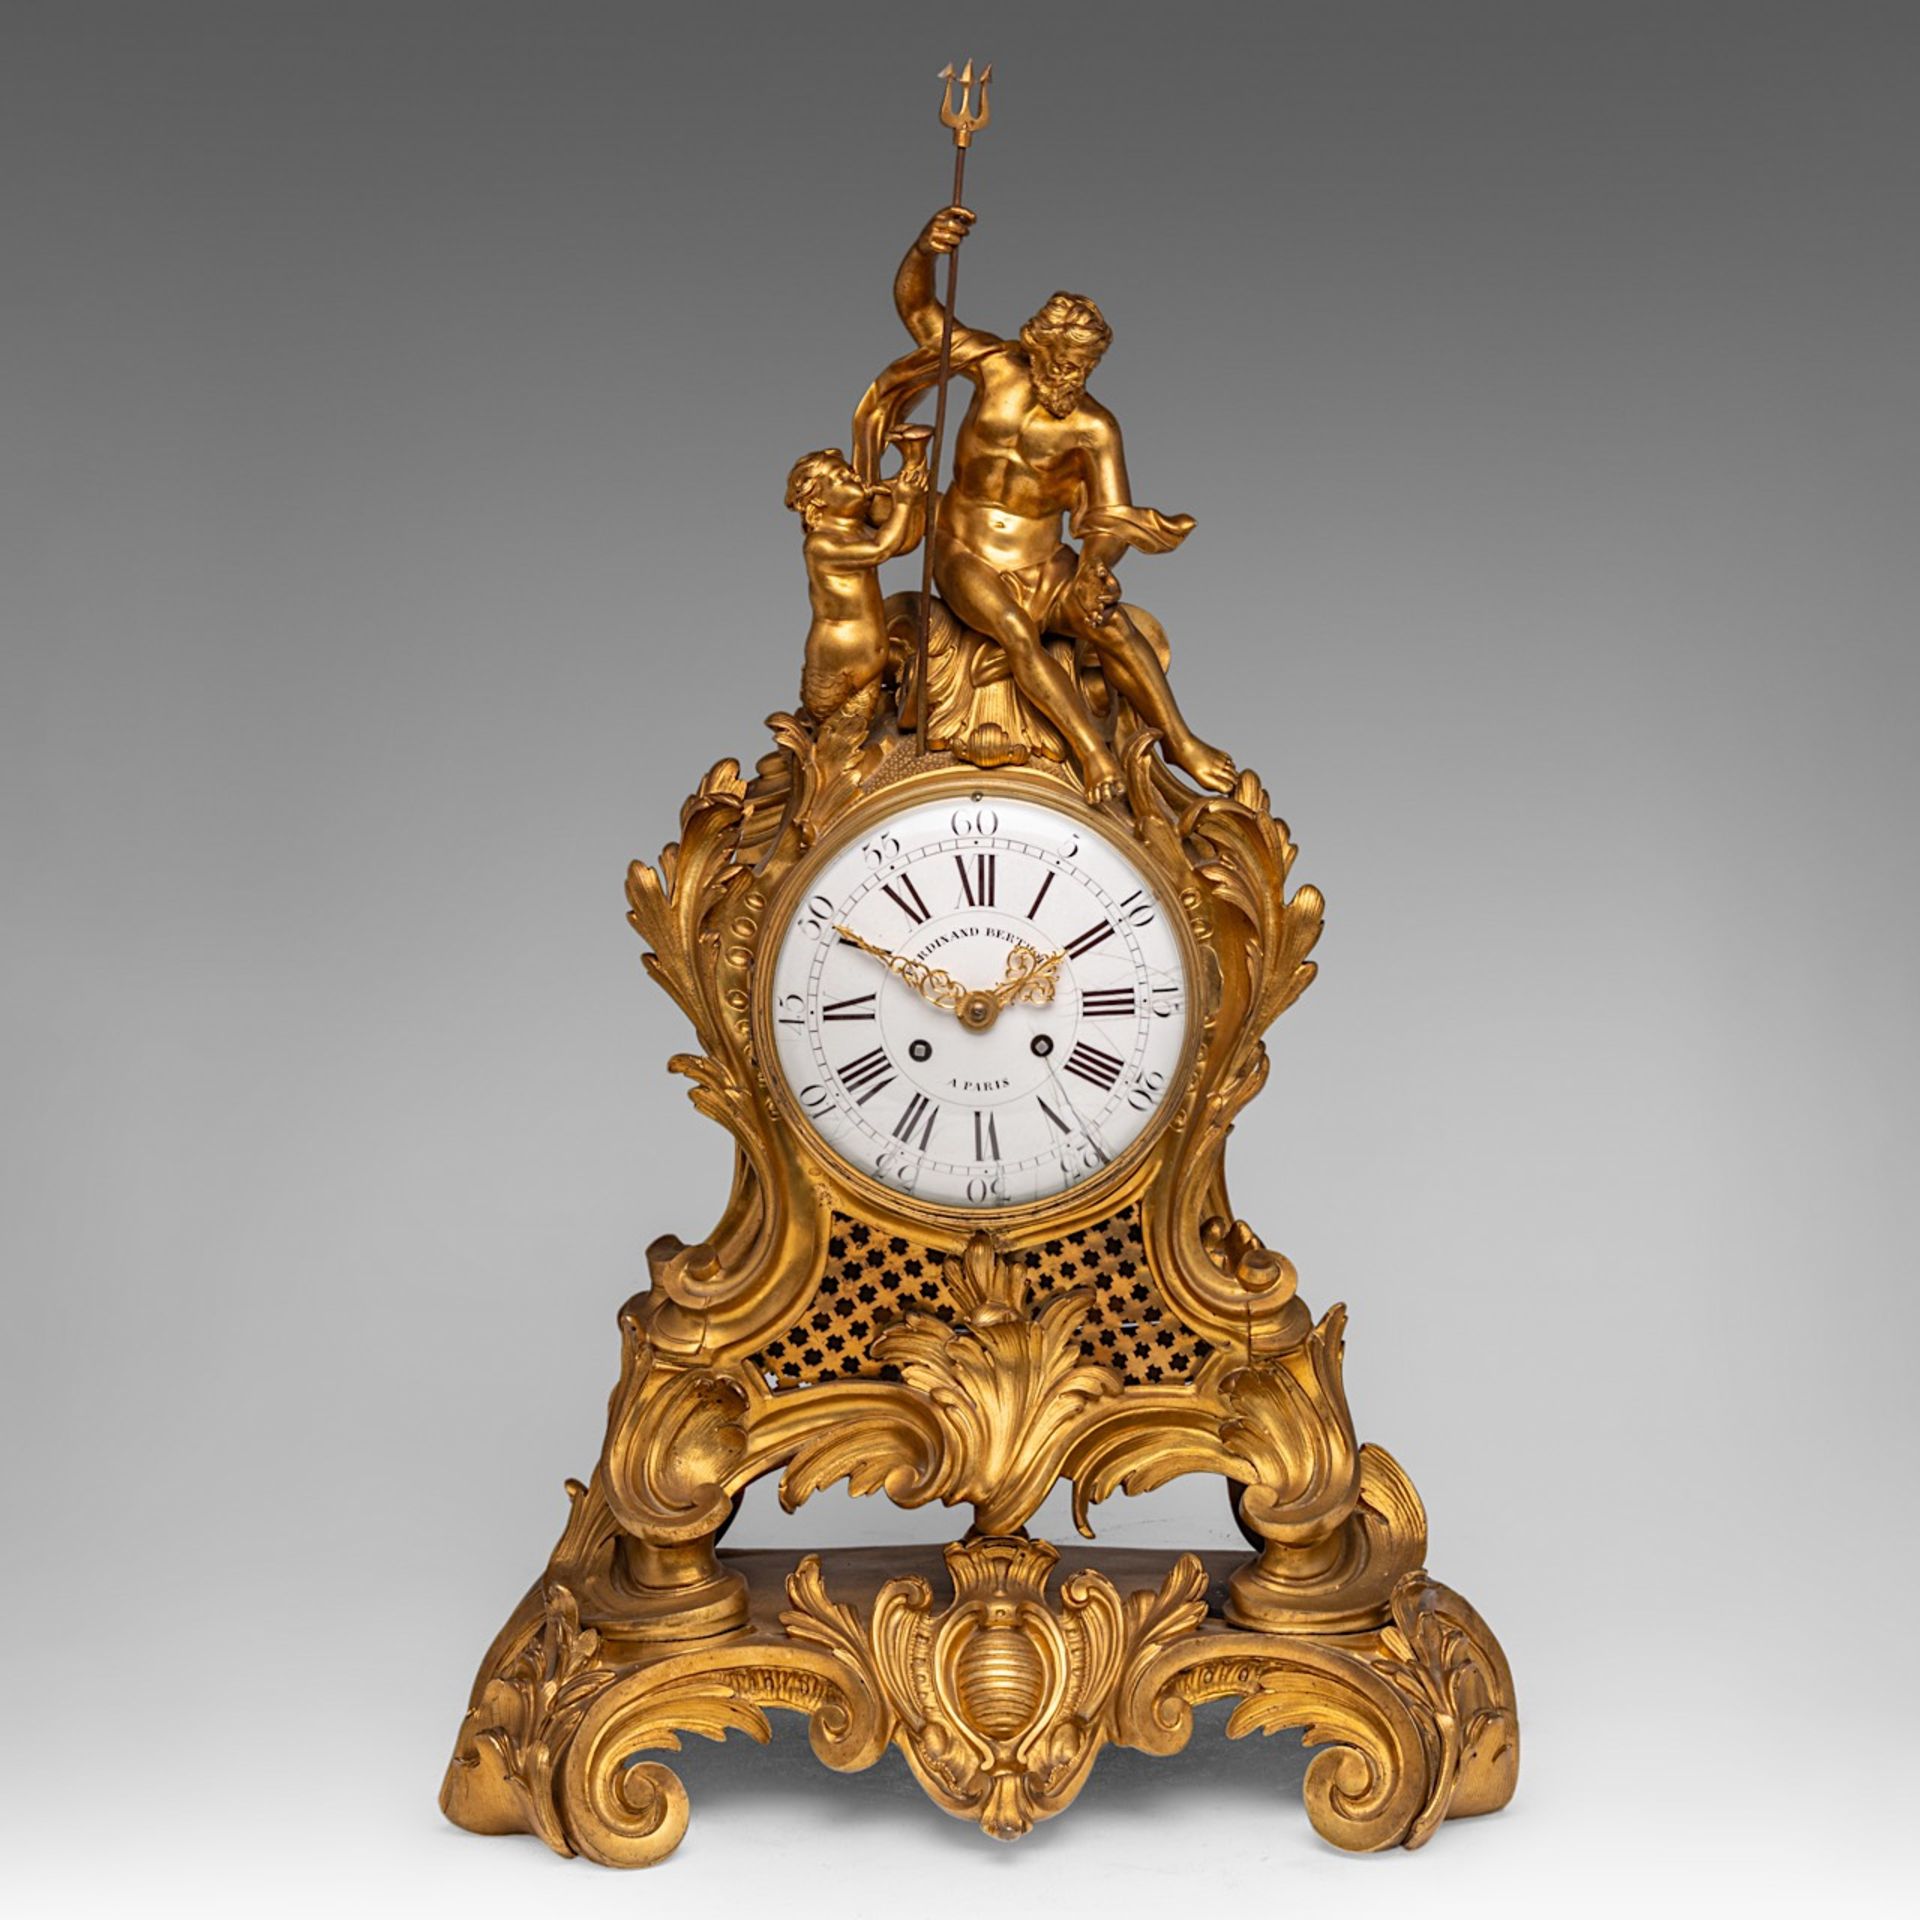 A Rococo Revival gilt bronze mantle clock, decorated with Neptune, Ferdinand Berthoud, H 71 cm